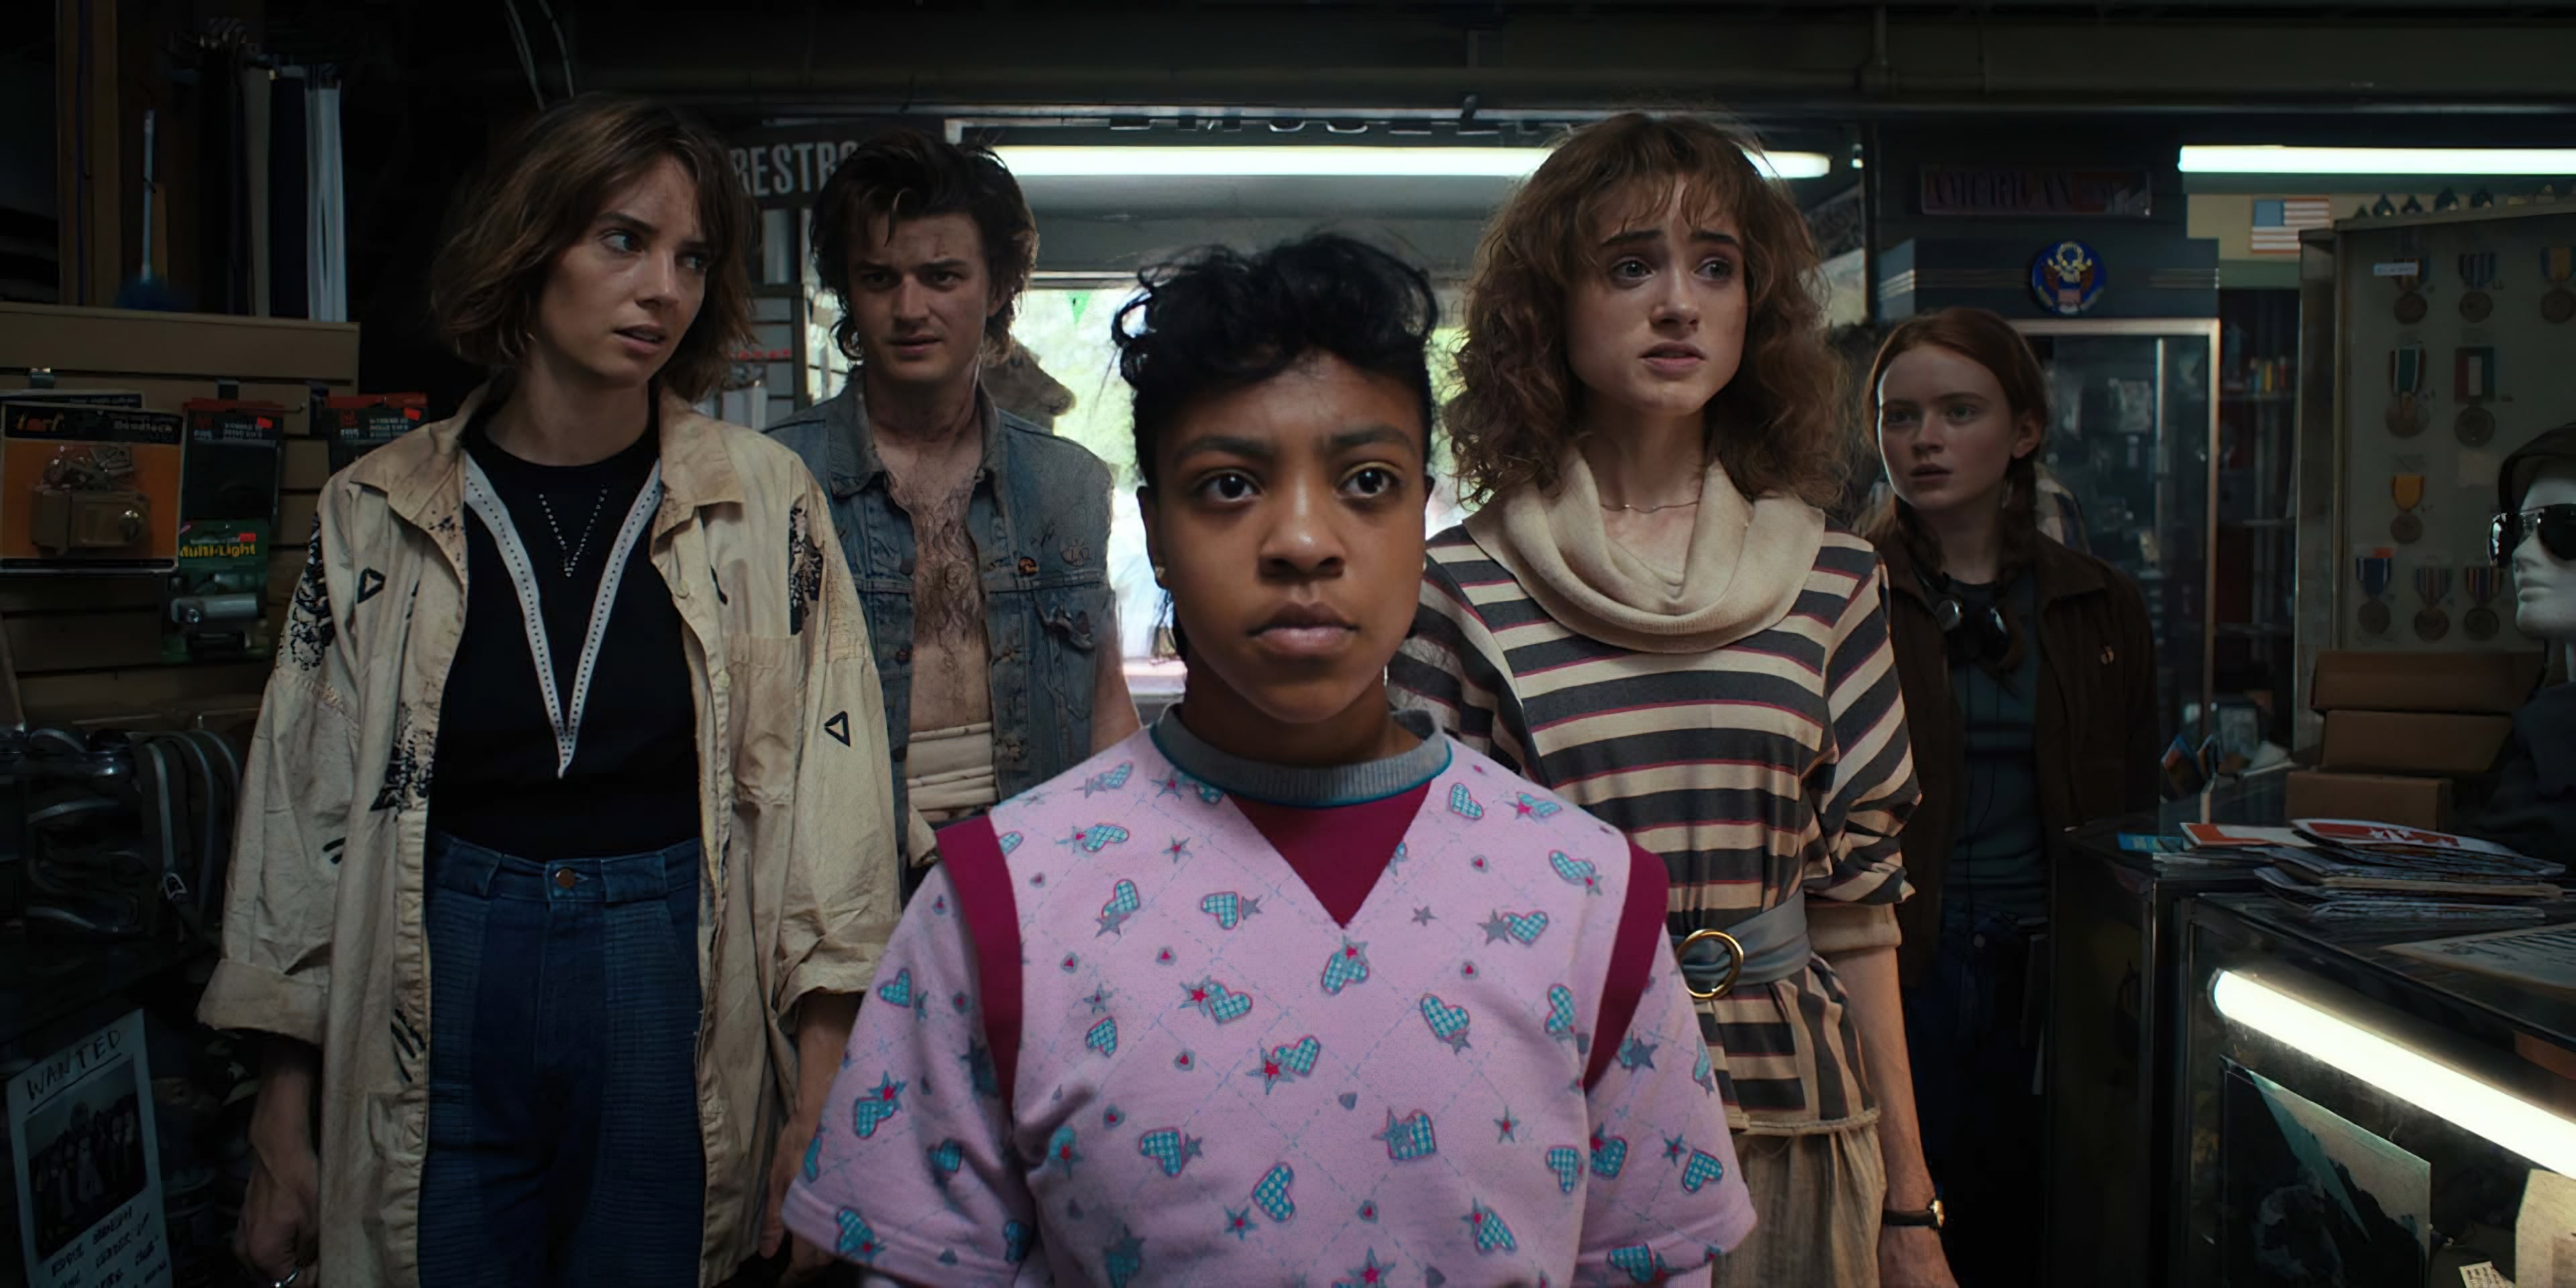 Can Stranger Things help put Netflix back on track?